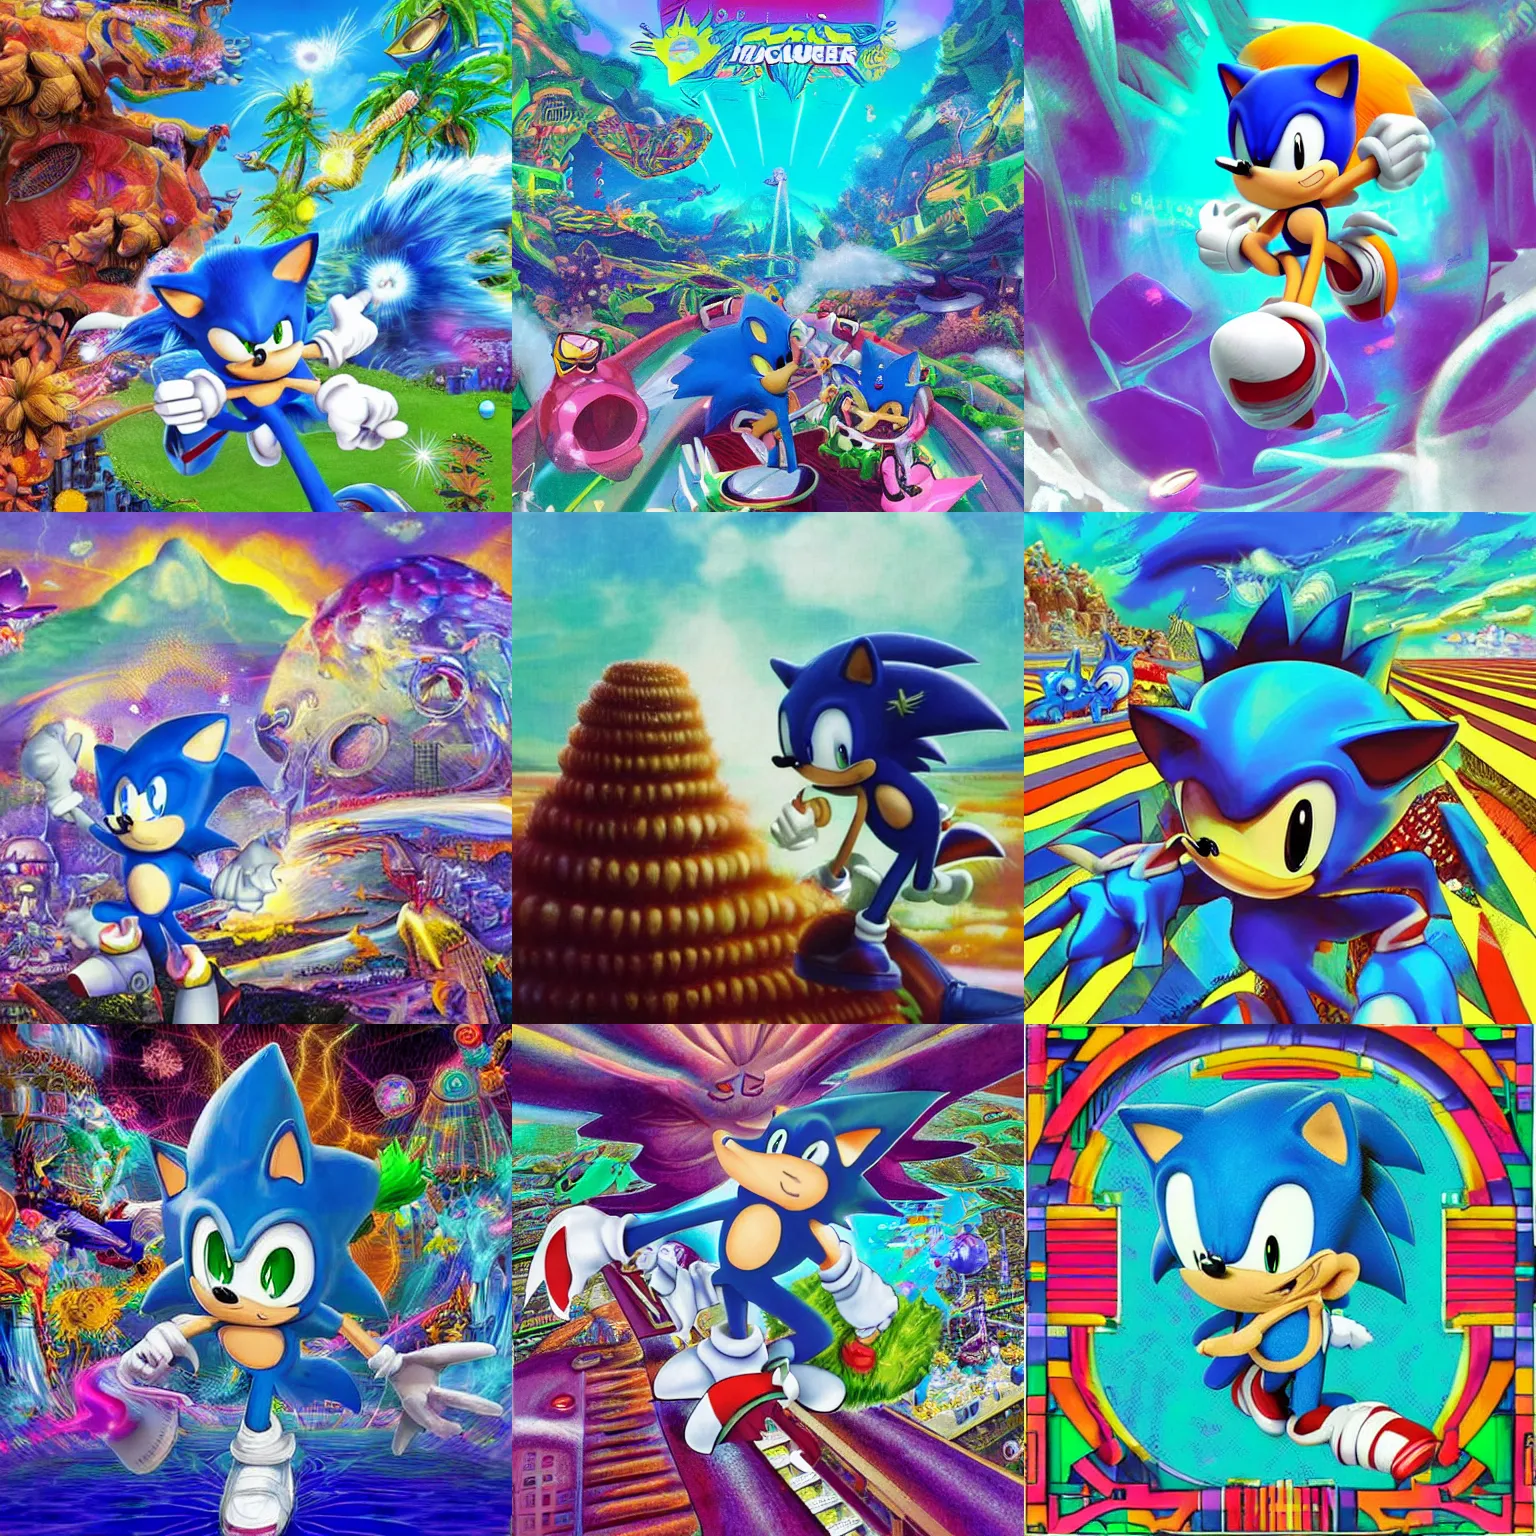 Prompt: sonic the hedgehog in a surreal, soft, detailed professional, high quality airbrush art mgmt shpongle album cover of a chrome dissolving LSD DMT blue sonic the hedgehog surfing through vaporwave cyberspace, checkerboard horizon , 1990s 1992 Sega Genesis video game album cover